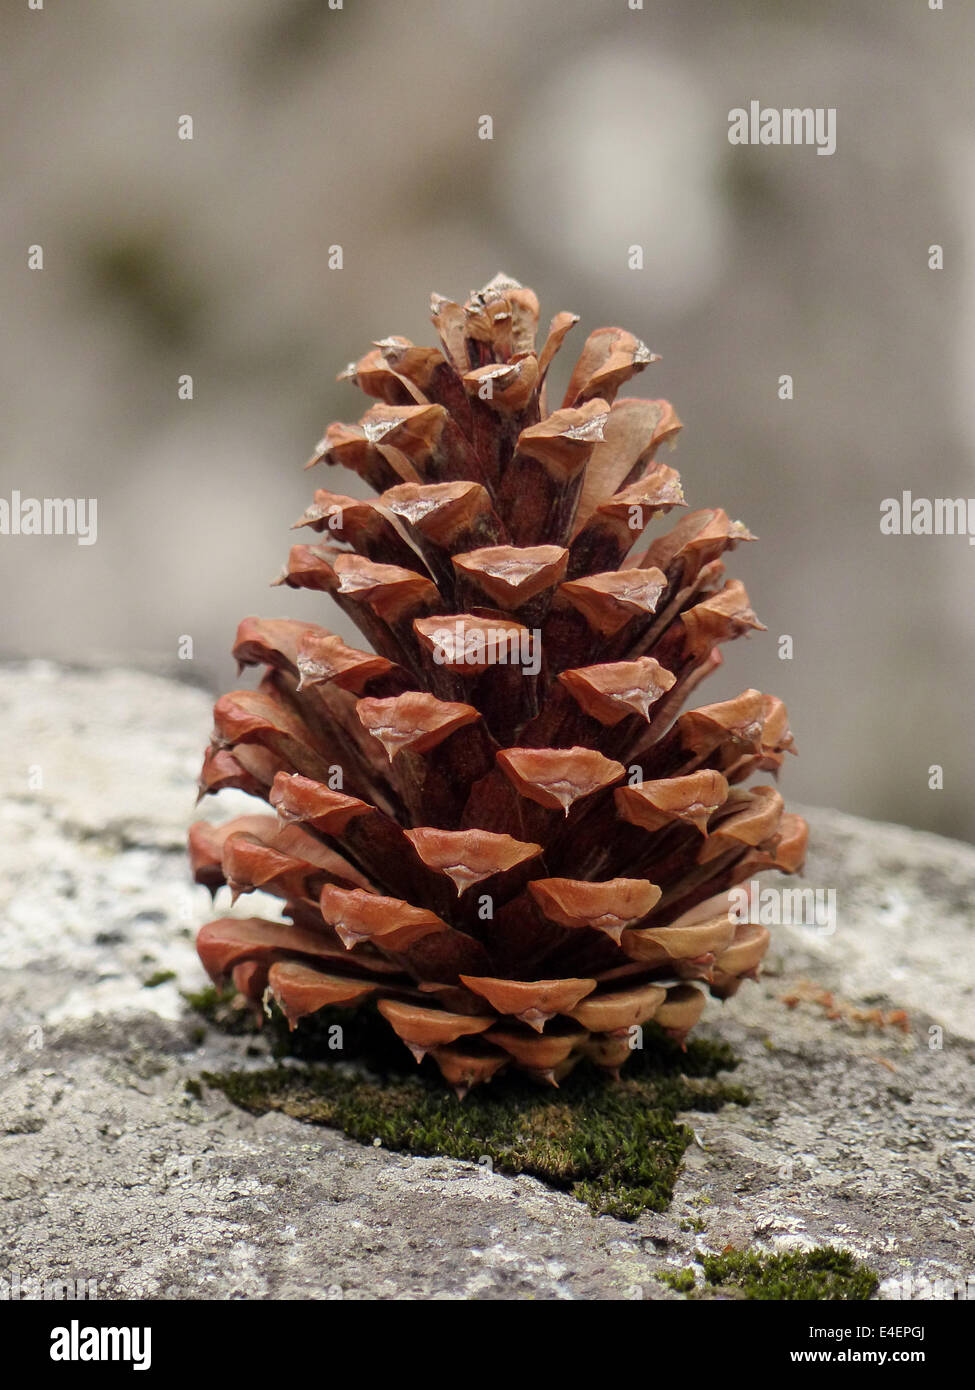 A fir cone on a mossy rock with an out of focus background Stock Photo